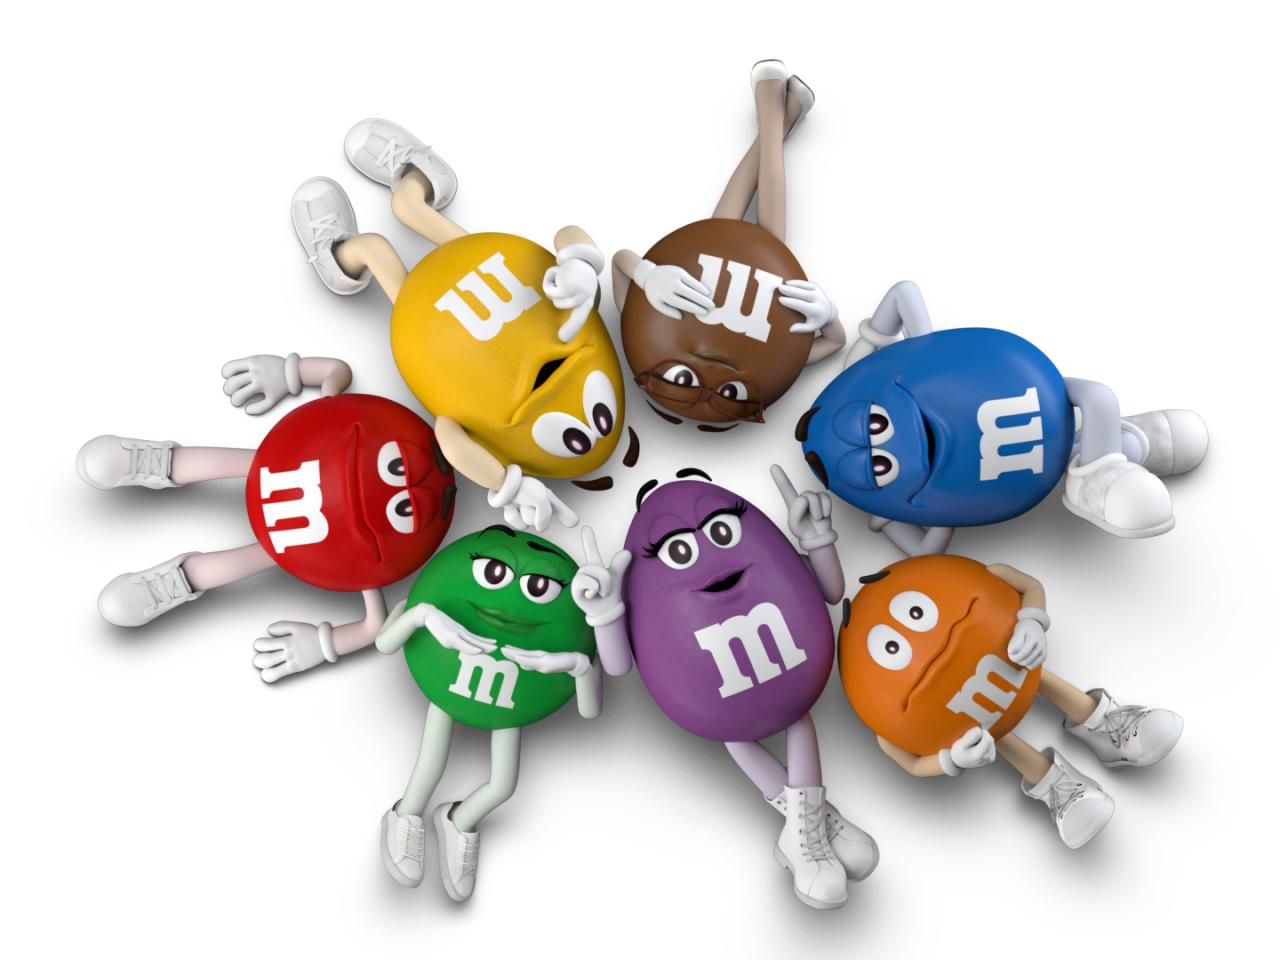 M&M's World Store Customize your M&M put your name and photo on